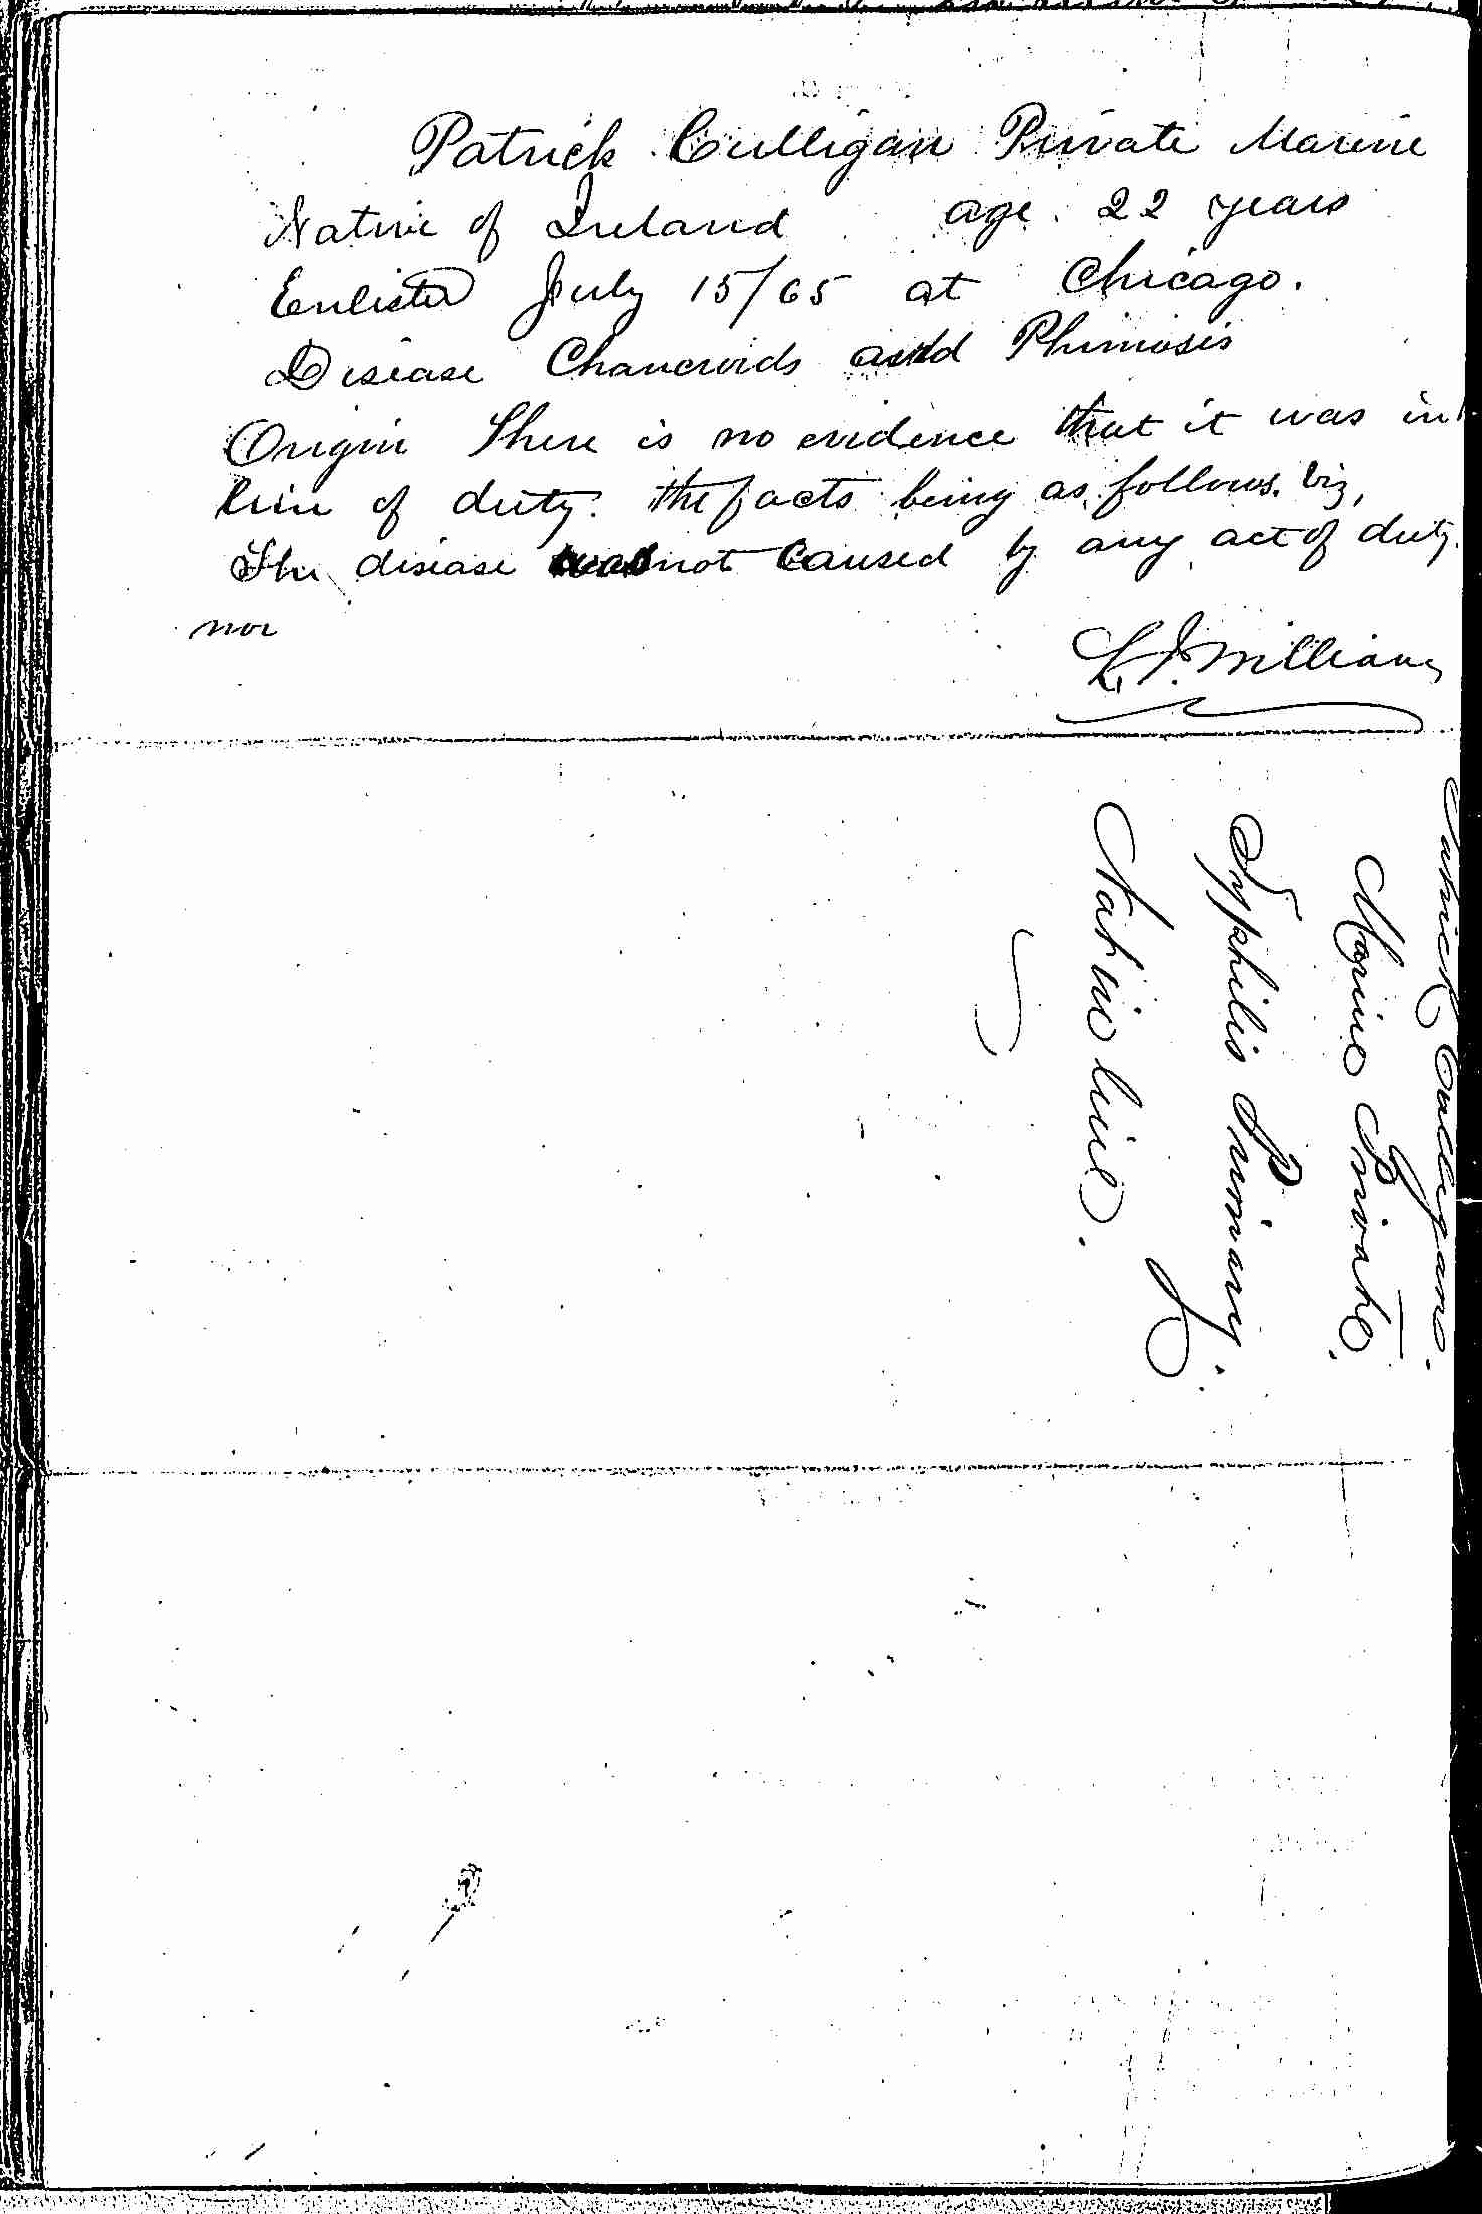 Entry for Patrick Culligan (page 2 of 2) in the log Hospital Tickets and Case Papers - Naval Hospital - Washington, D.C. - 1865-68